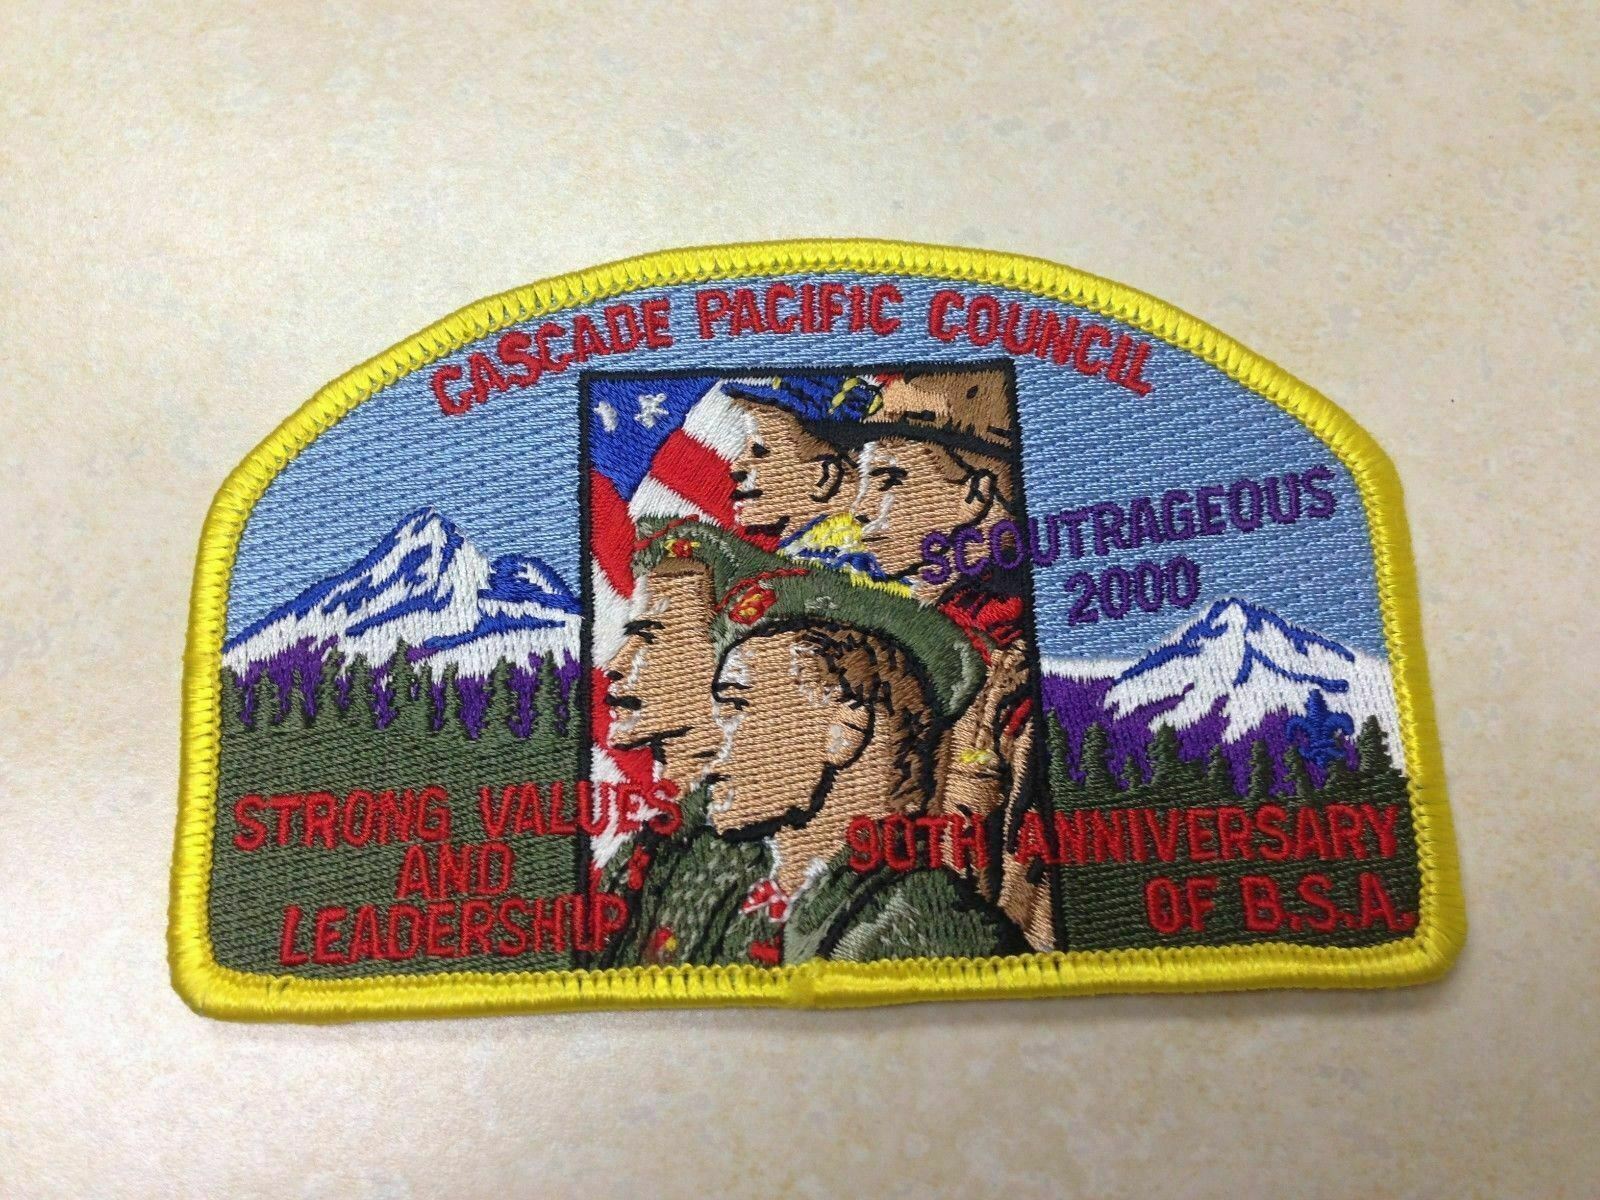 Cascade Pacific Council SA-37 CSP 90th Anniv of Scouting AF 01-133